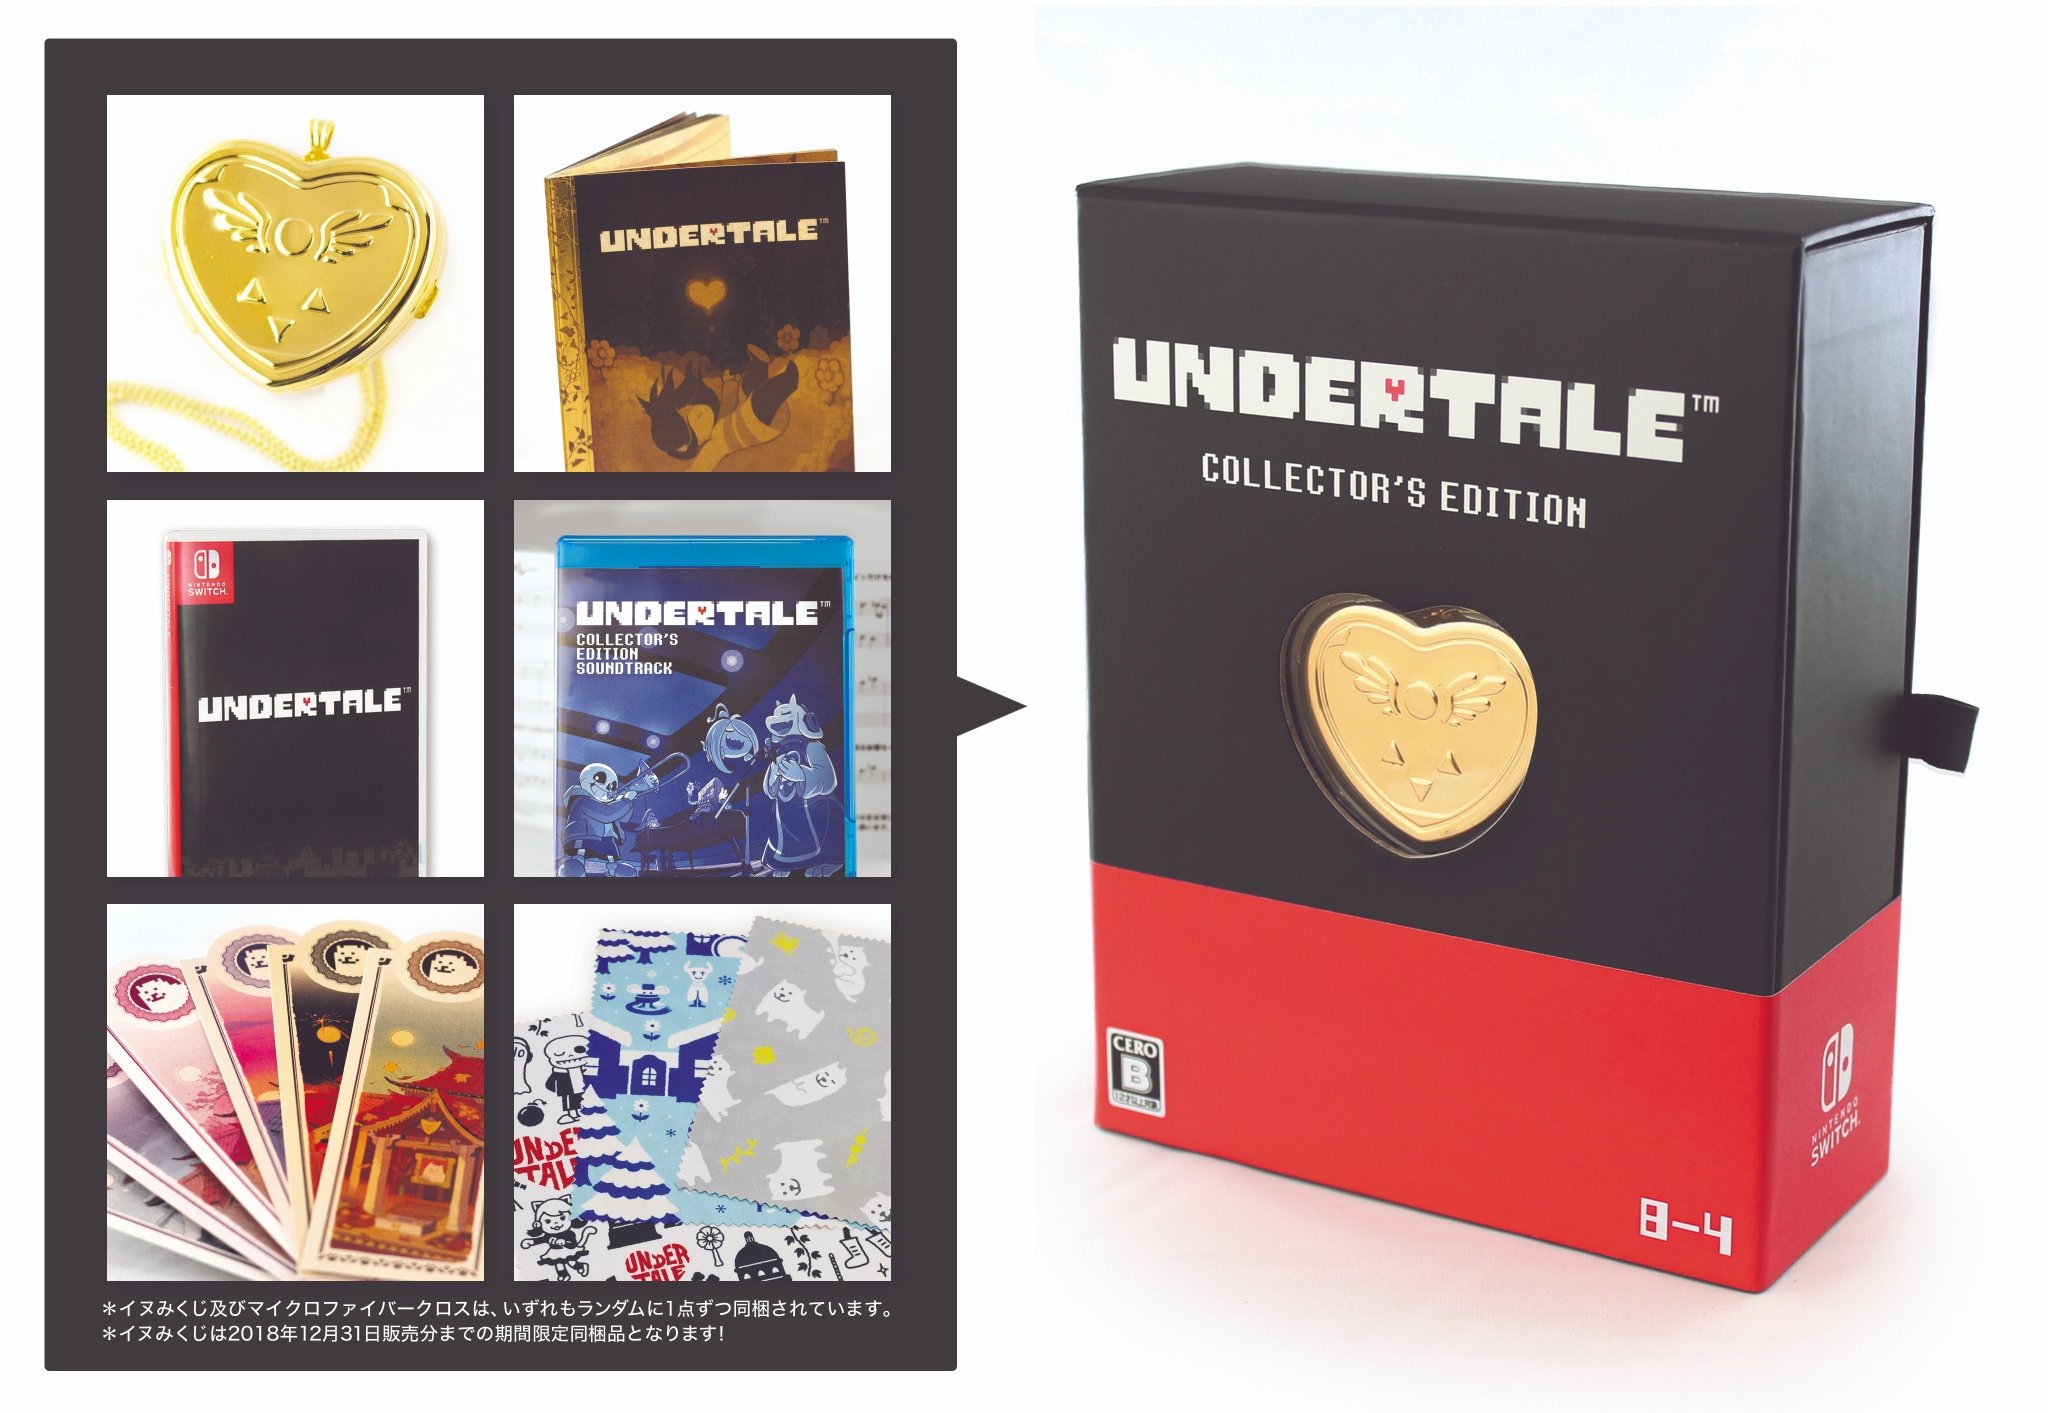 Undertale Heads Switch Japan On September 15 A Sweet Collector's Edition - Siliconera